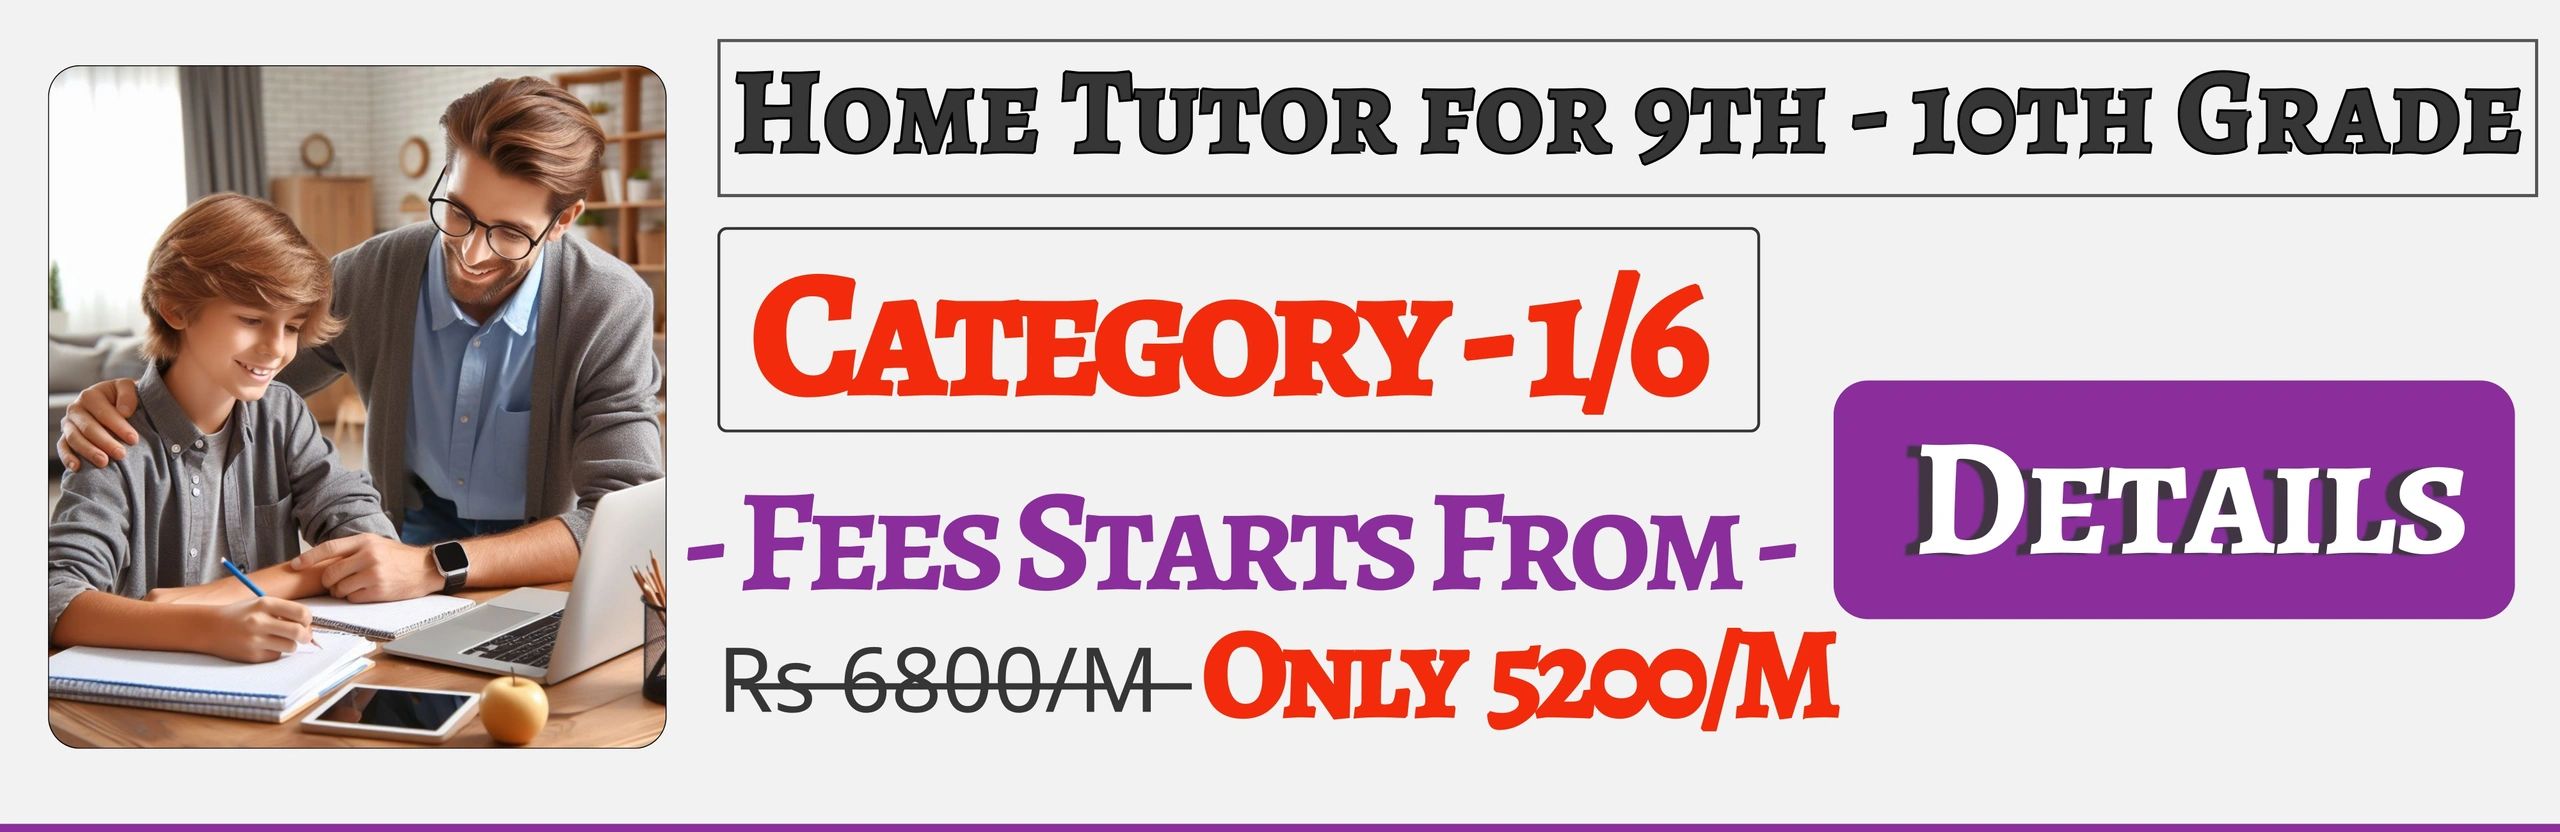 Book Best Home Tuition Tutors For 9th & 10th In Jaipur , Fees Only 5200/M